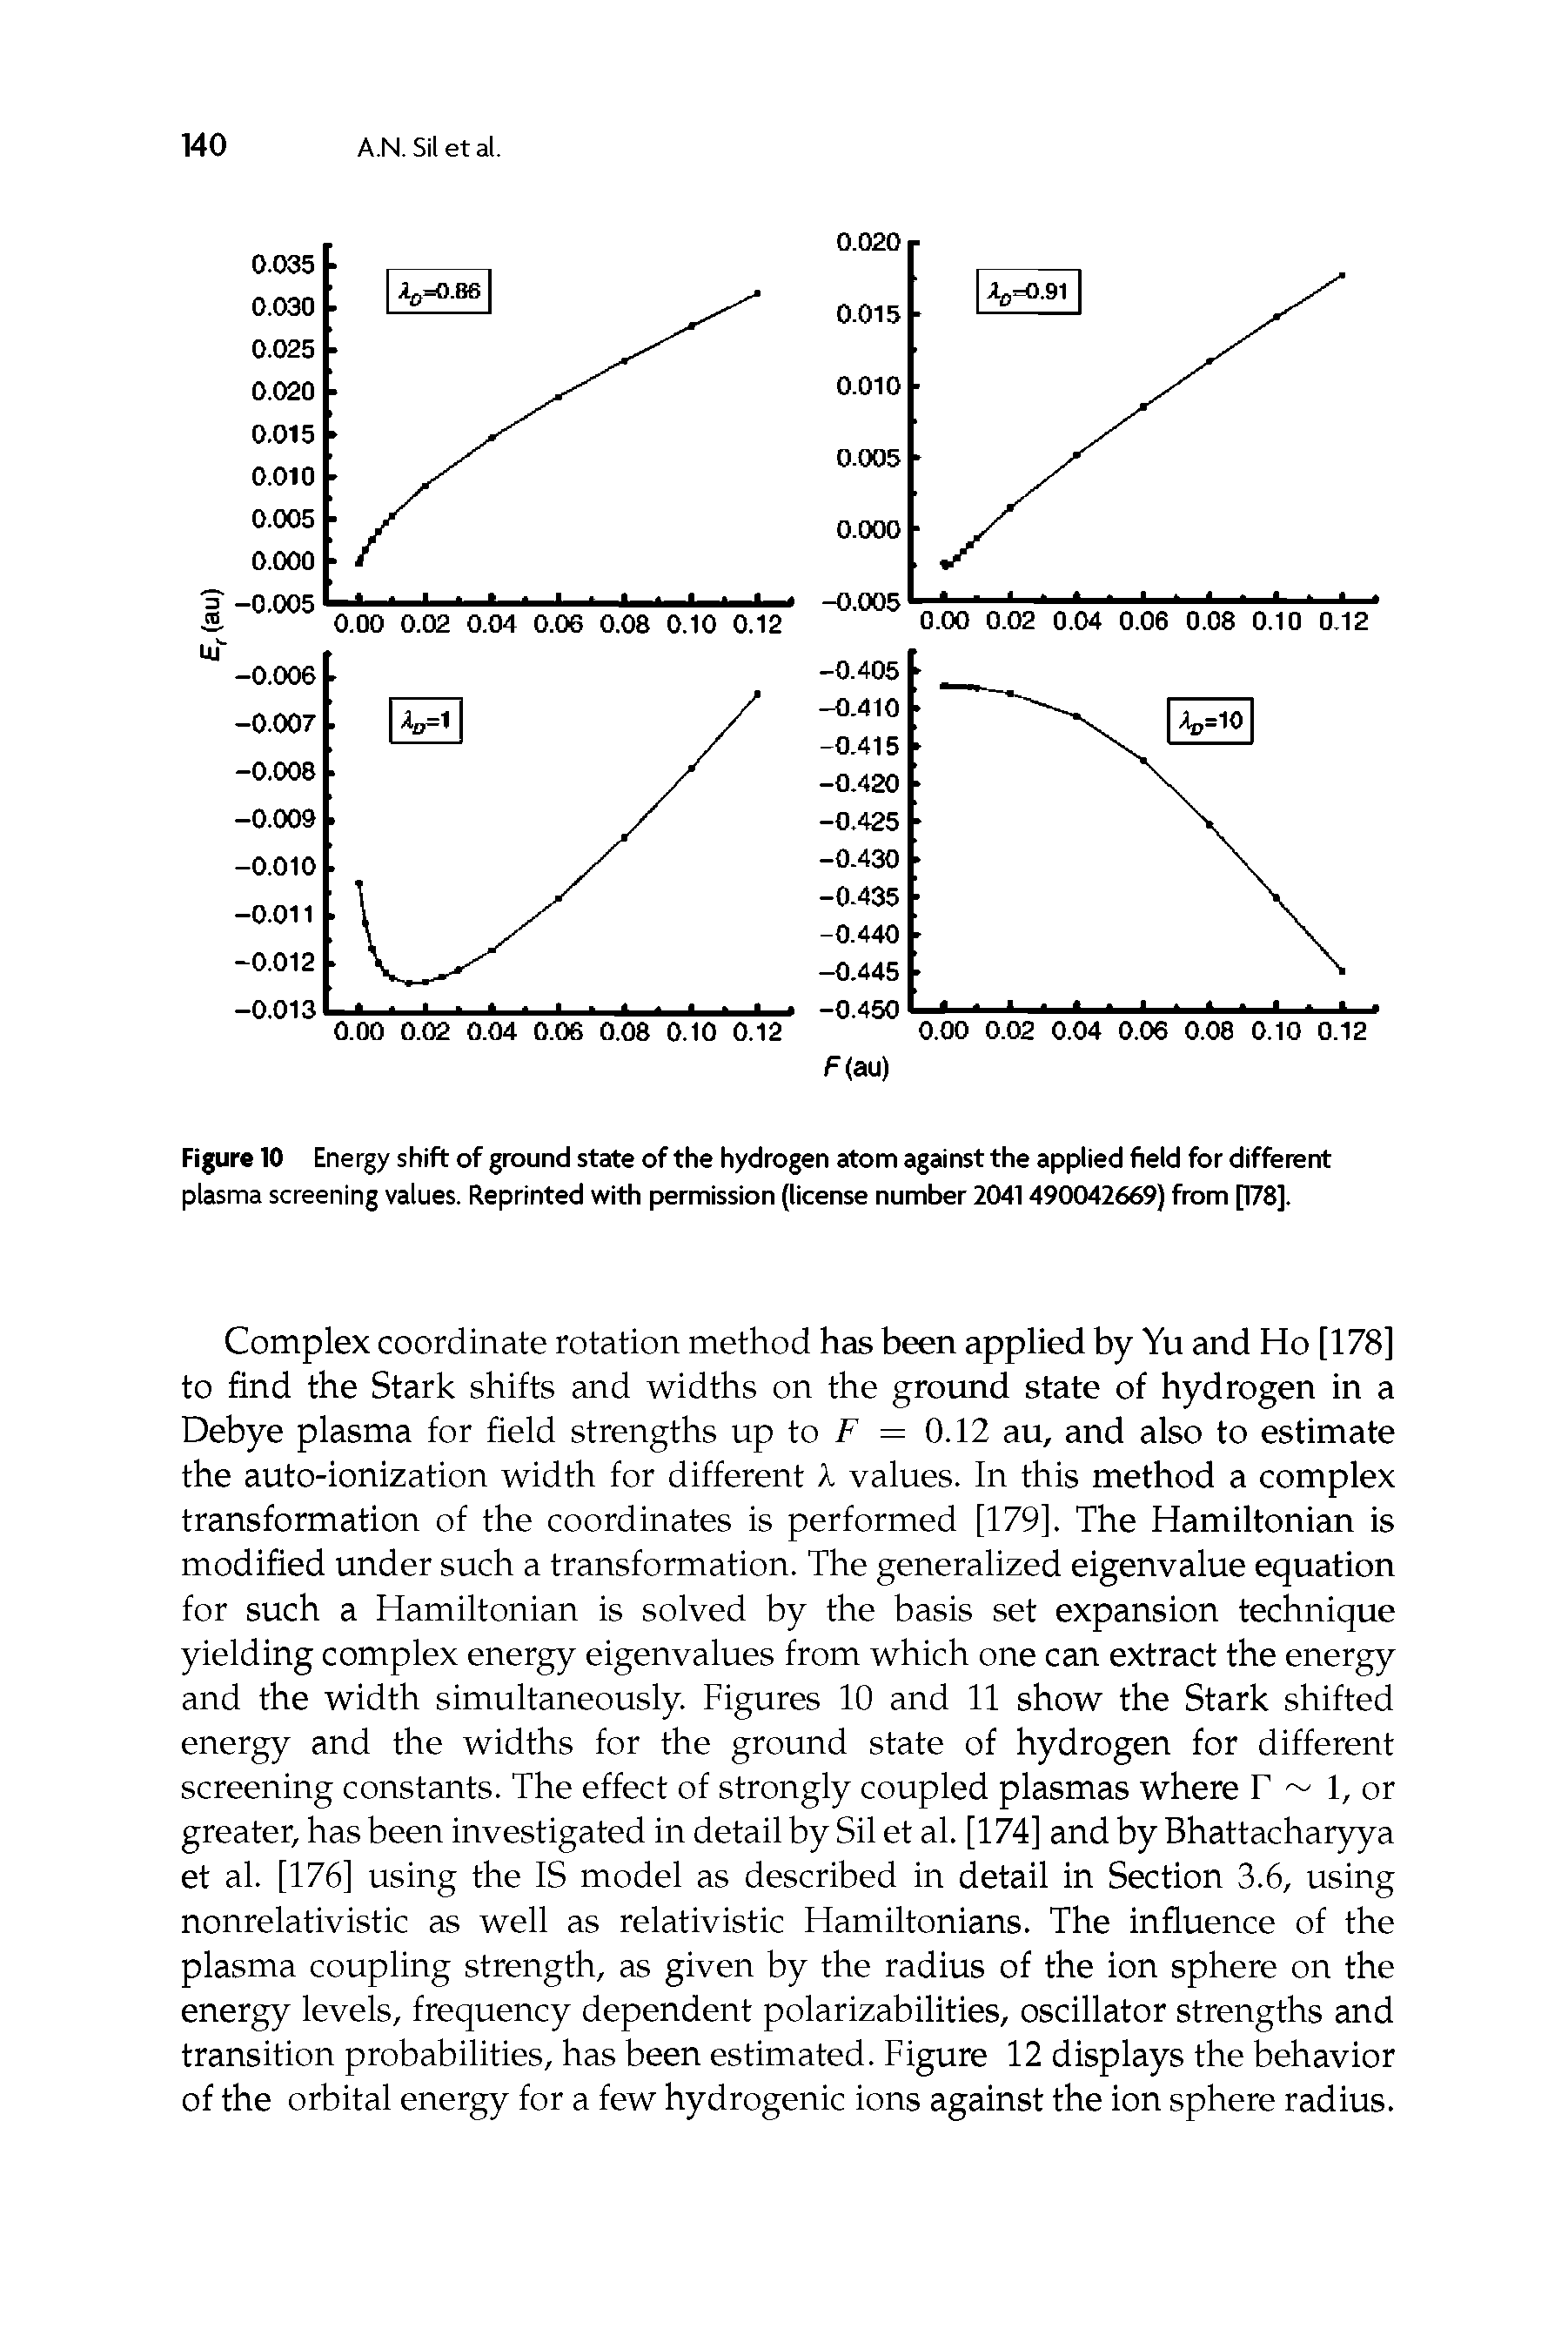 Figure 10 Energy shift of ground state of the hydrogen atom against the applied field for different plasma screening values. Reprinted with permission (license number 2041490042669) from [178].